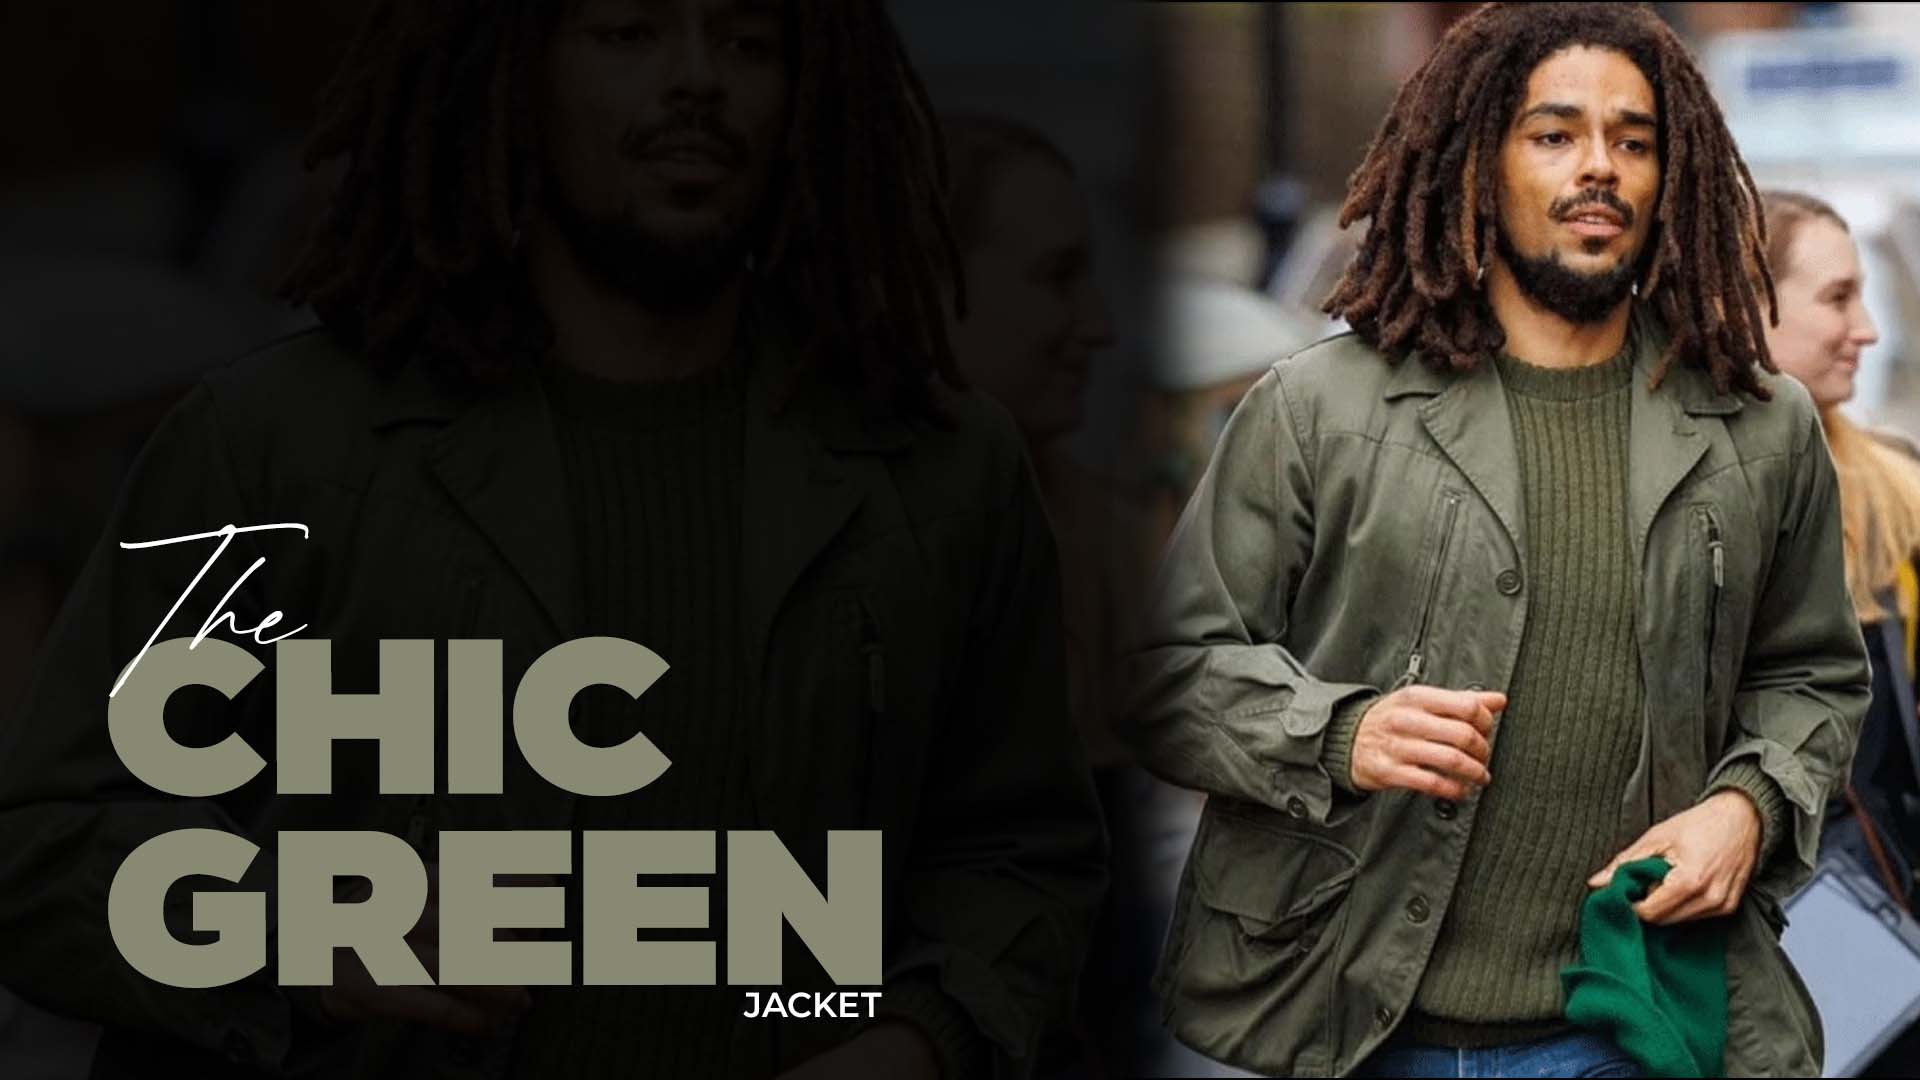 The Chic Green Jacket